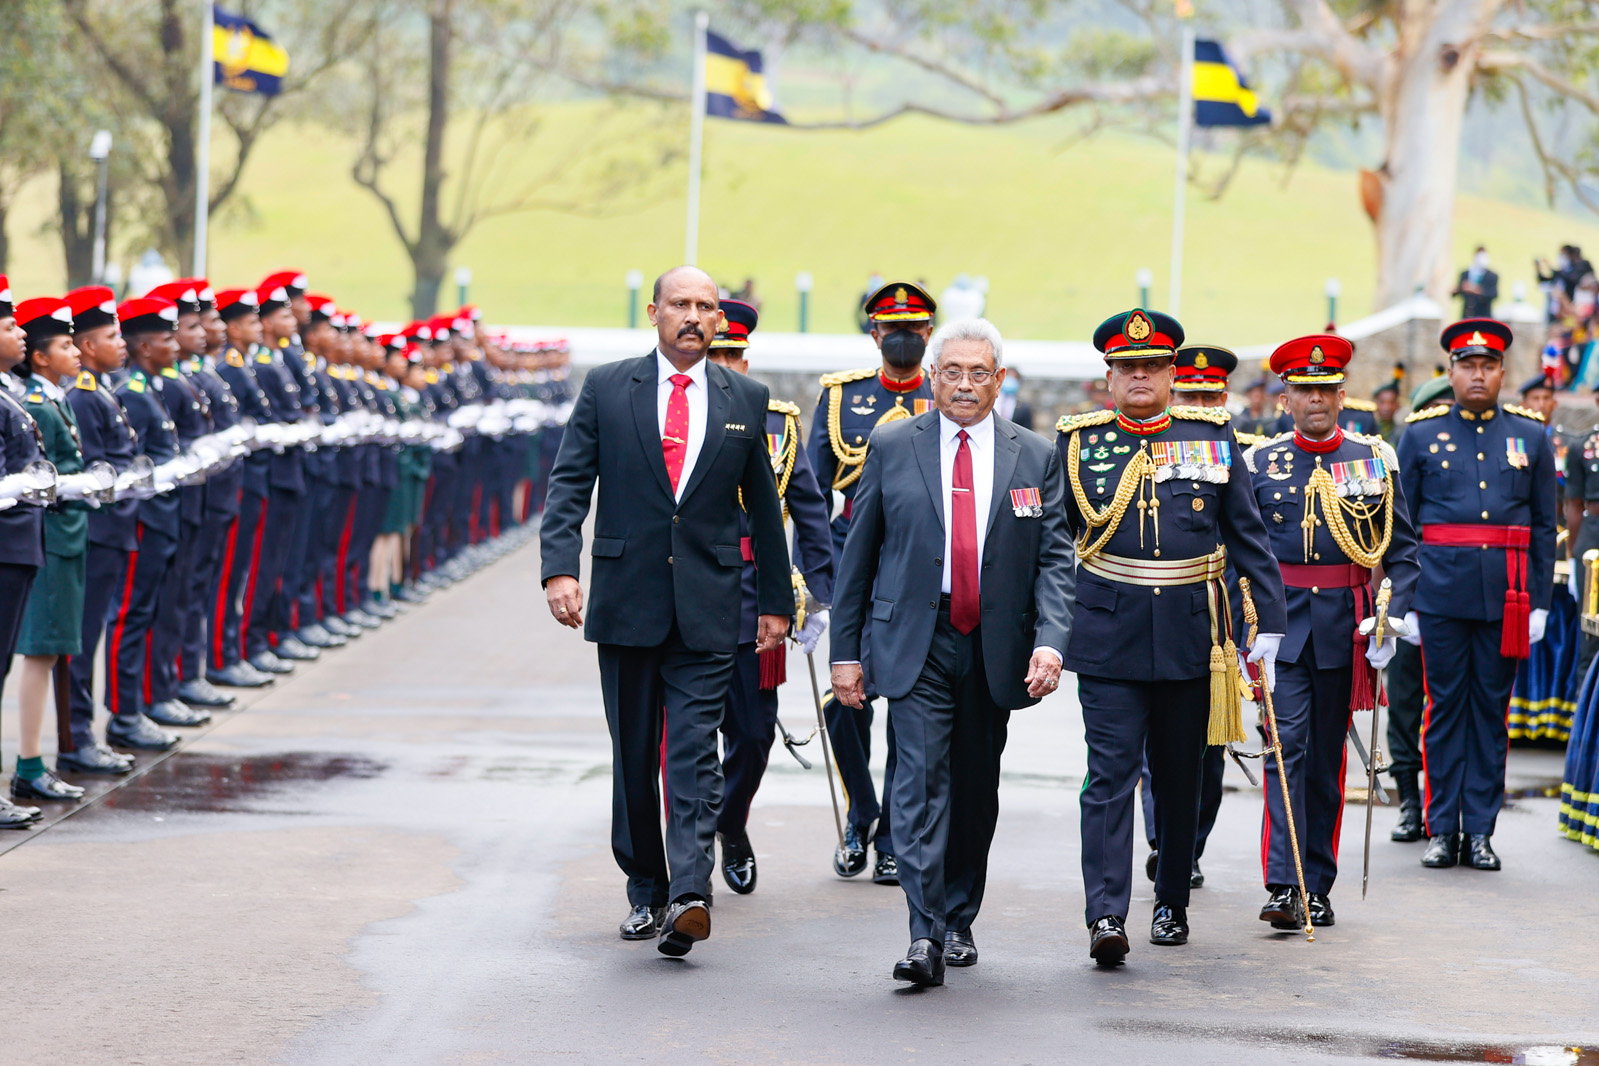 Discipline is one of the most important aspects in a military officer’s life – President